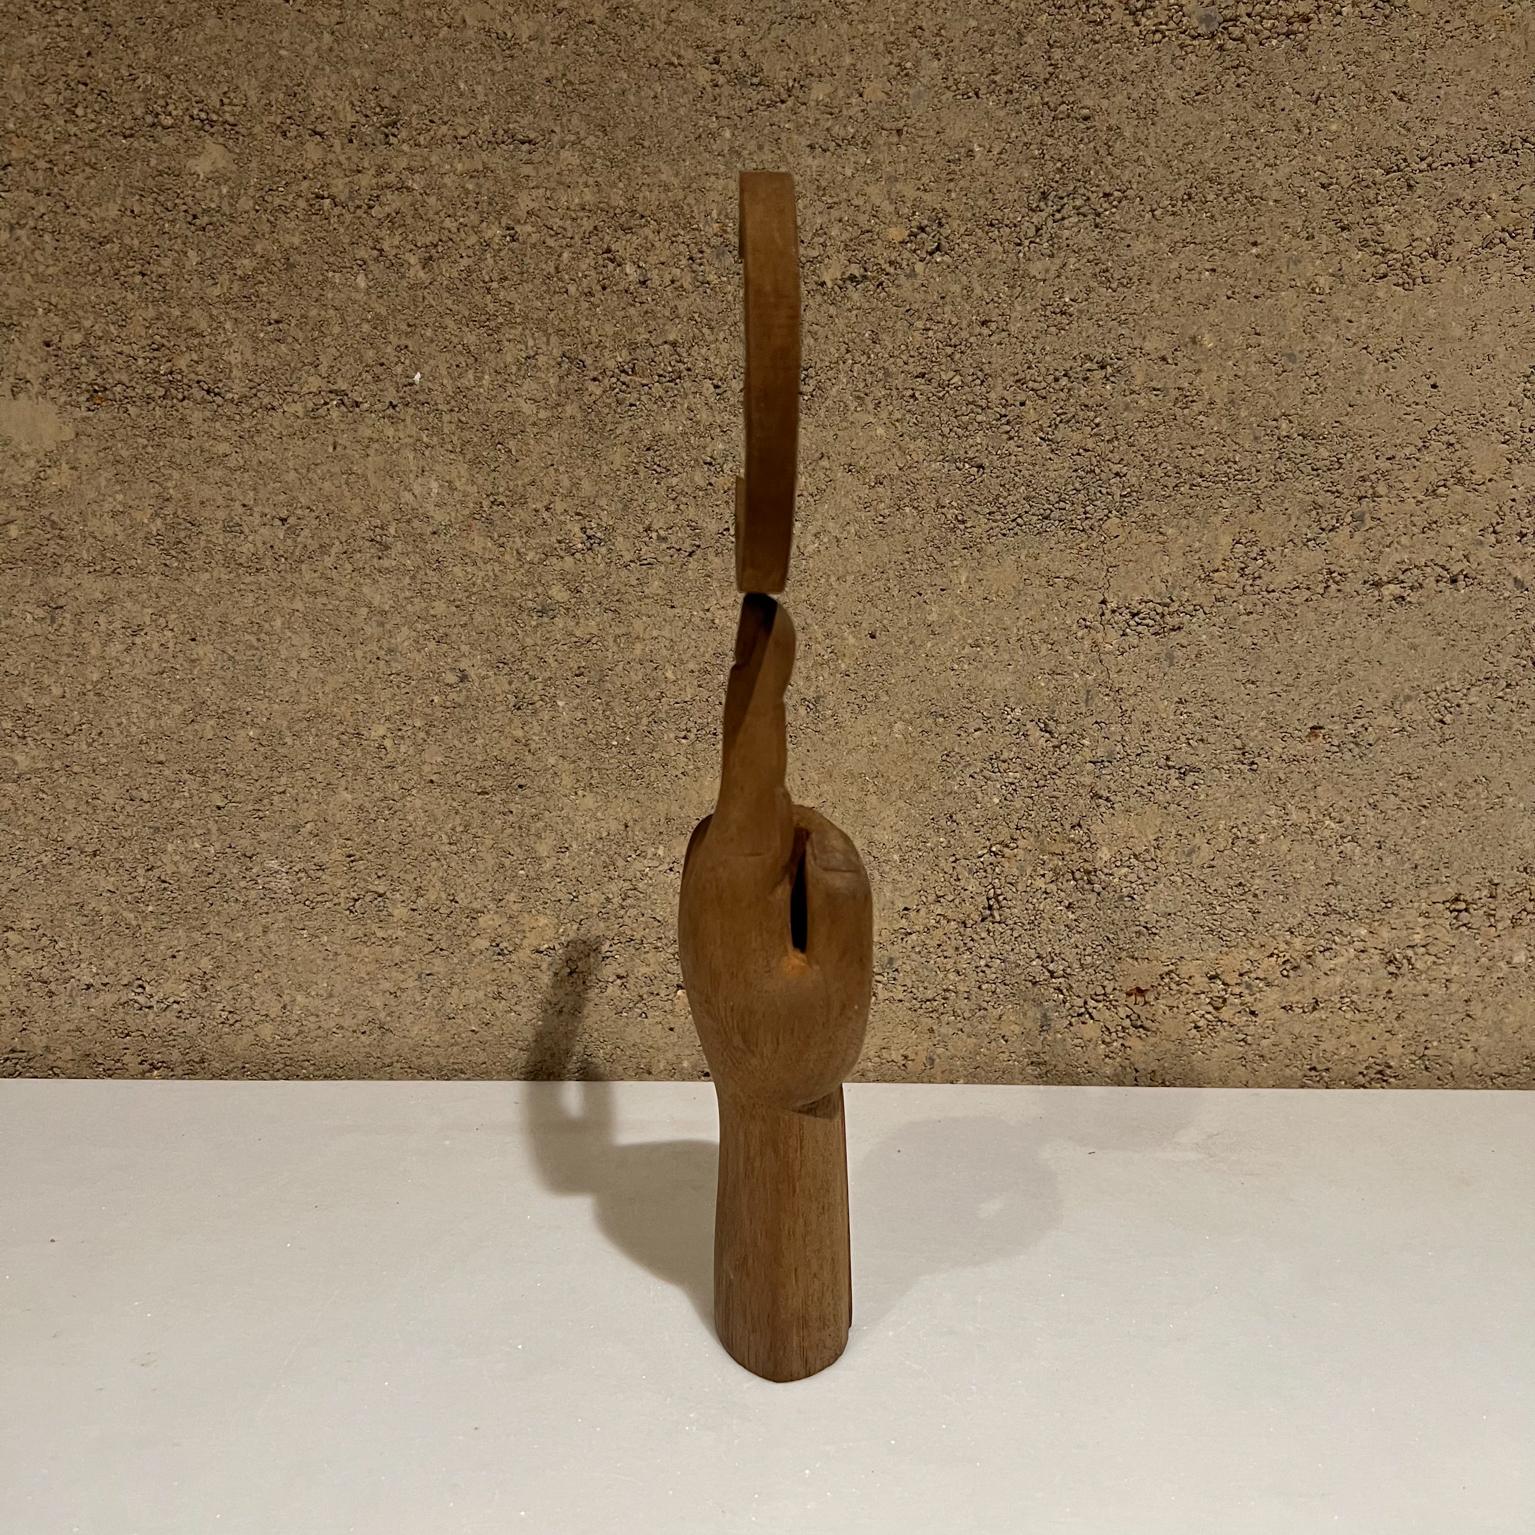 1960s Pedro Friedeberg Hand Moon Mahogany Wood Art Sculpture In Good Condition For Sale In Chula Vista, CA